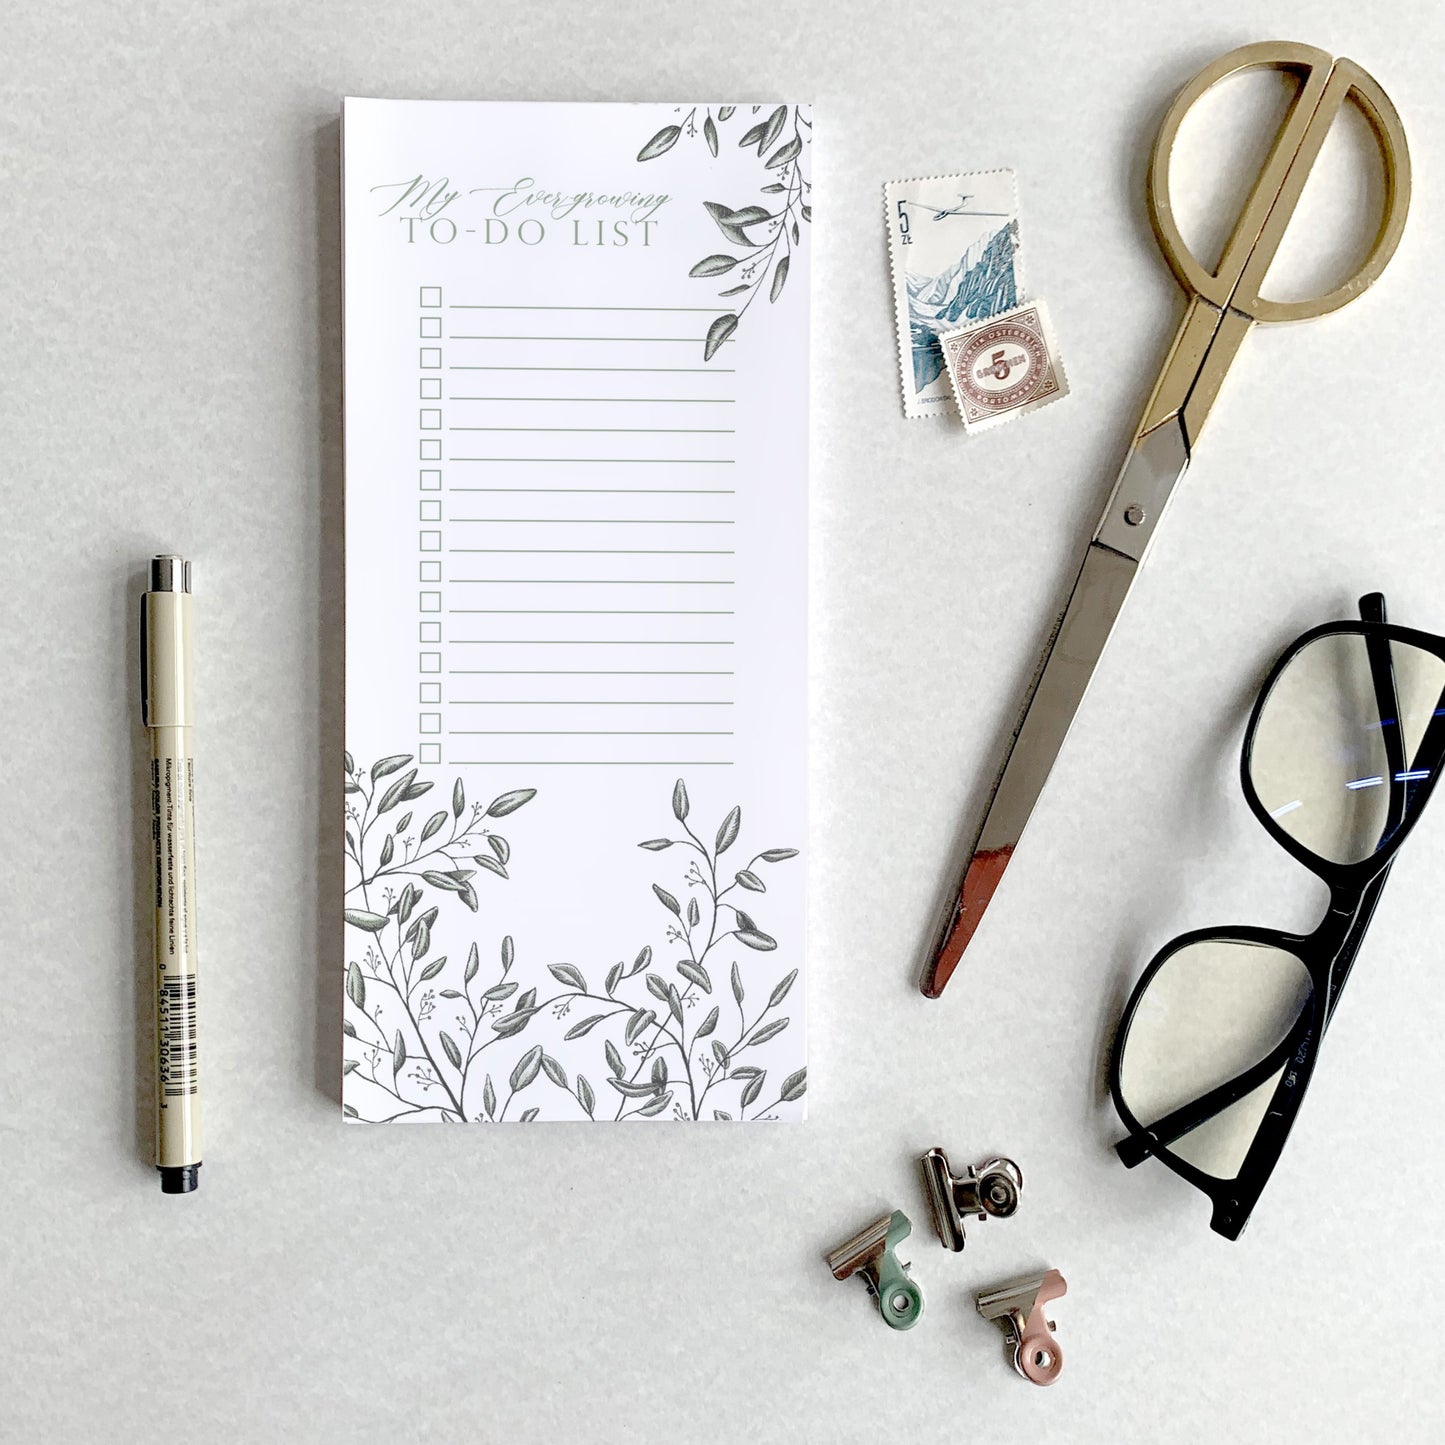 3.5 by 8.5 notepad with lined sheets with florals that says "My ever-growing to-do list" by Rust Belt Love